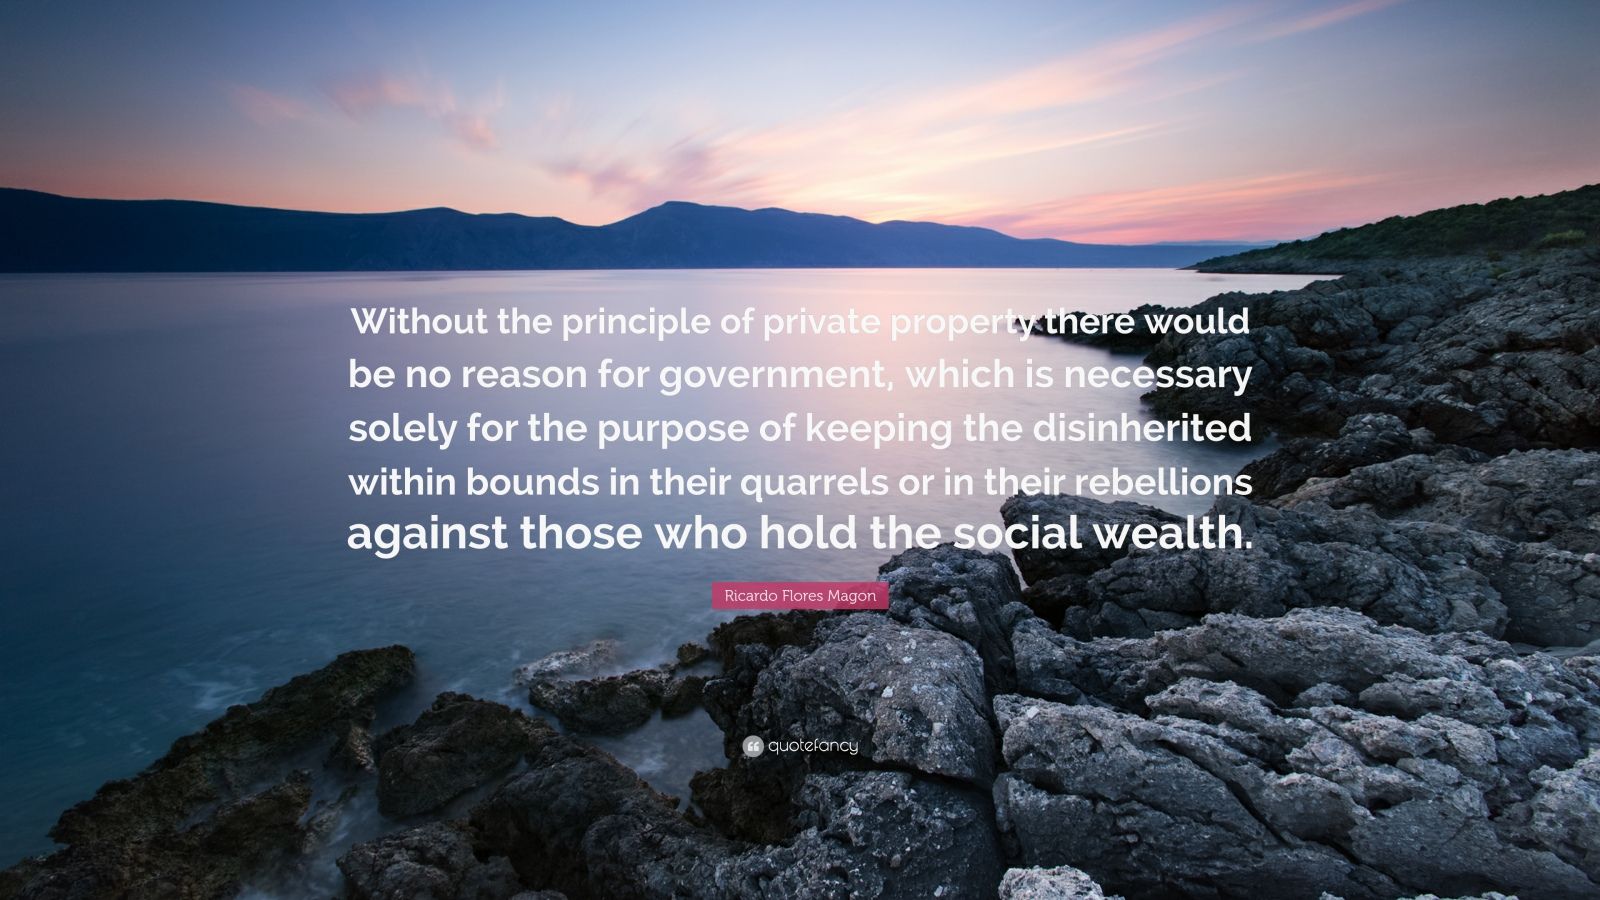 Ricardo Flores Magon Quote: “Without the principle of private property ...